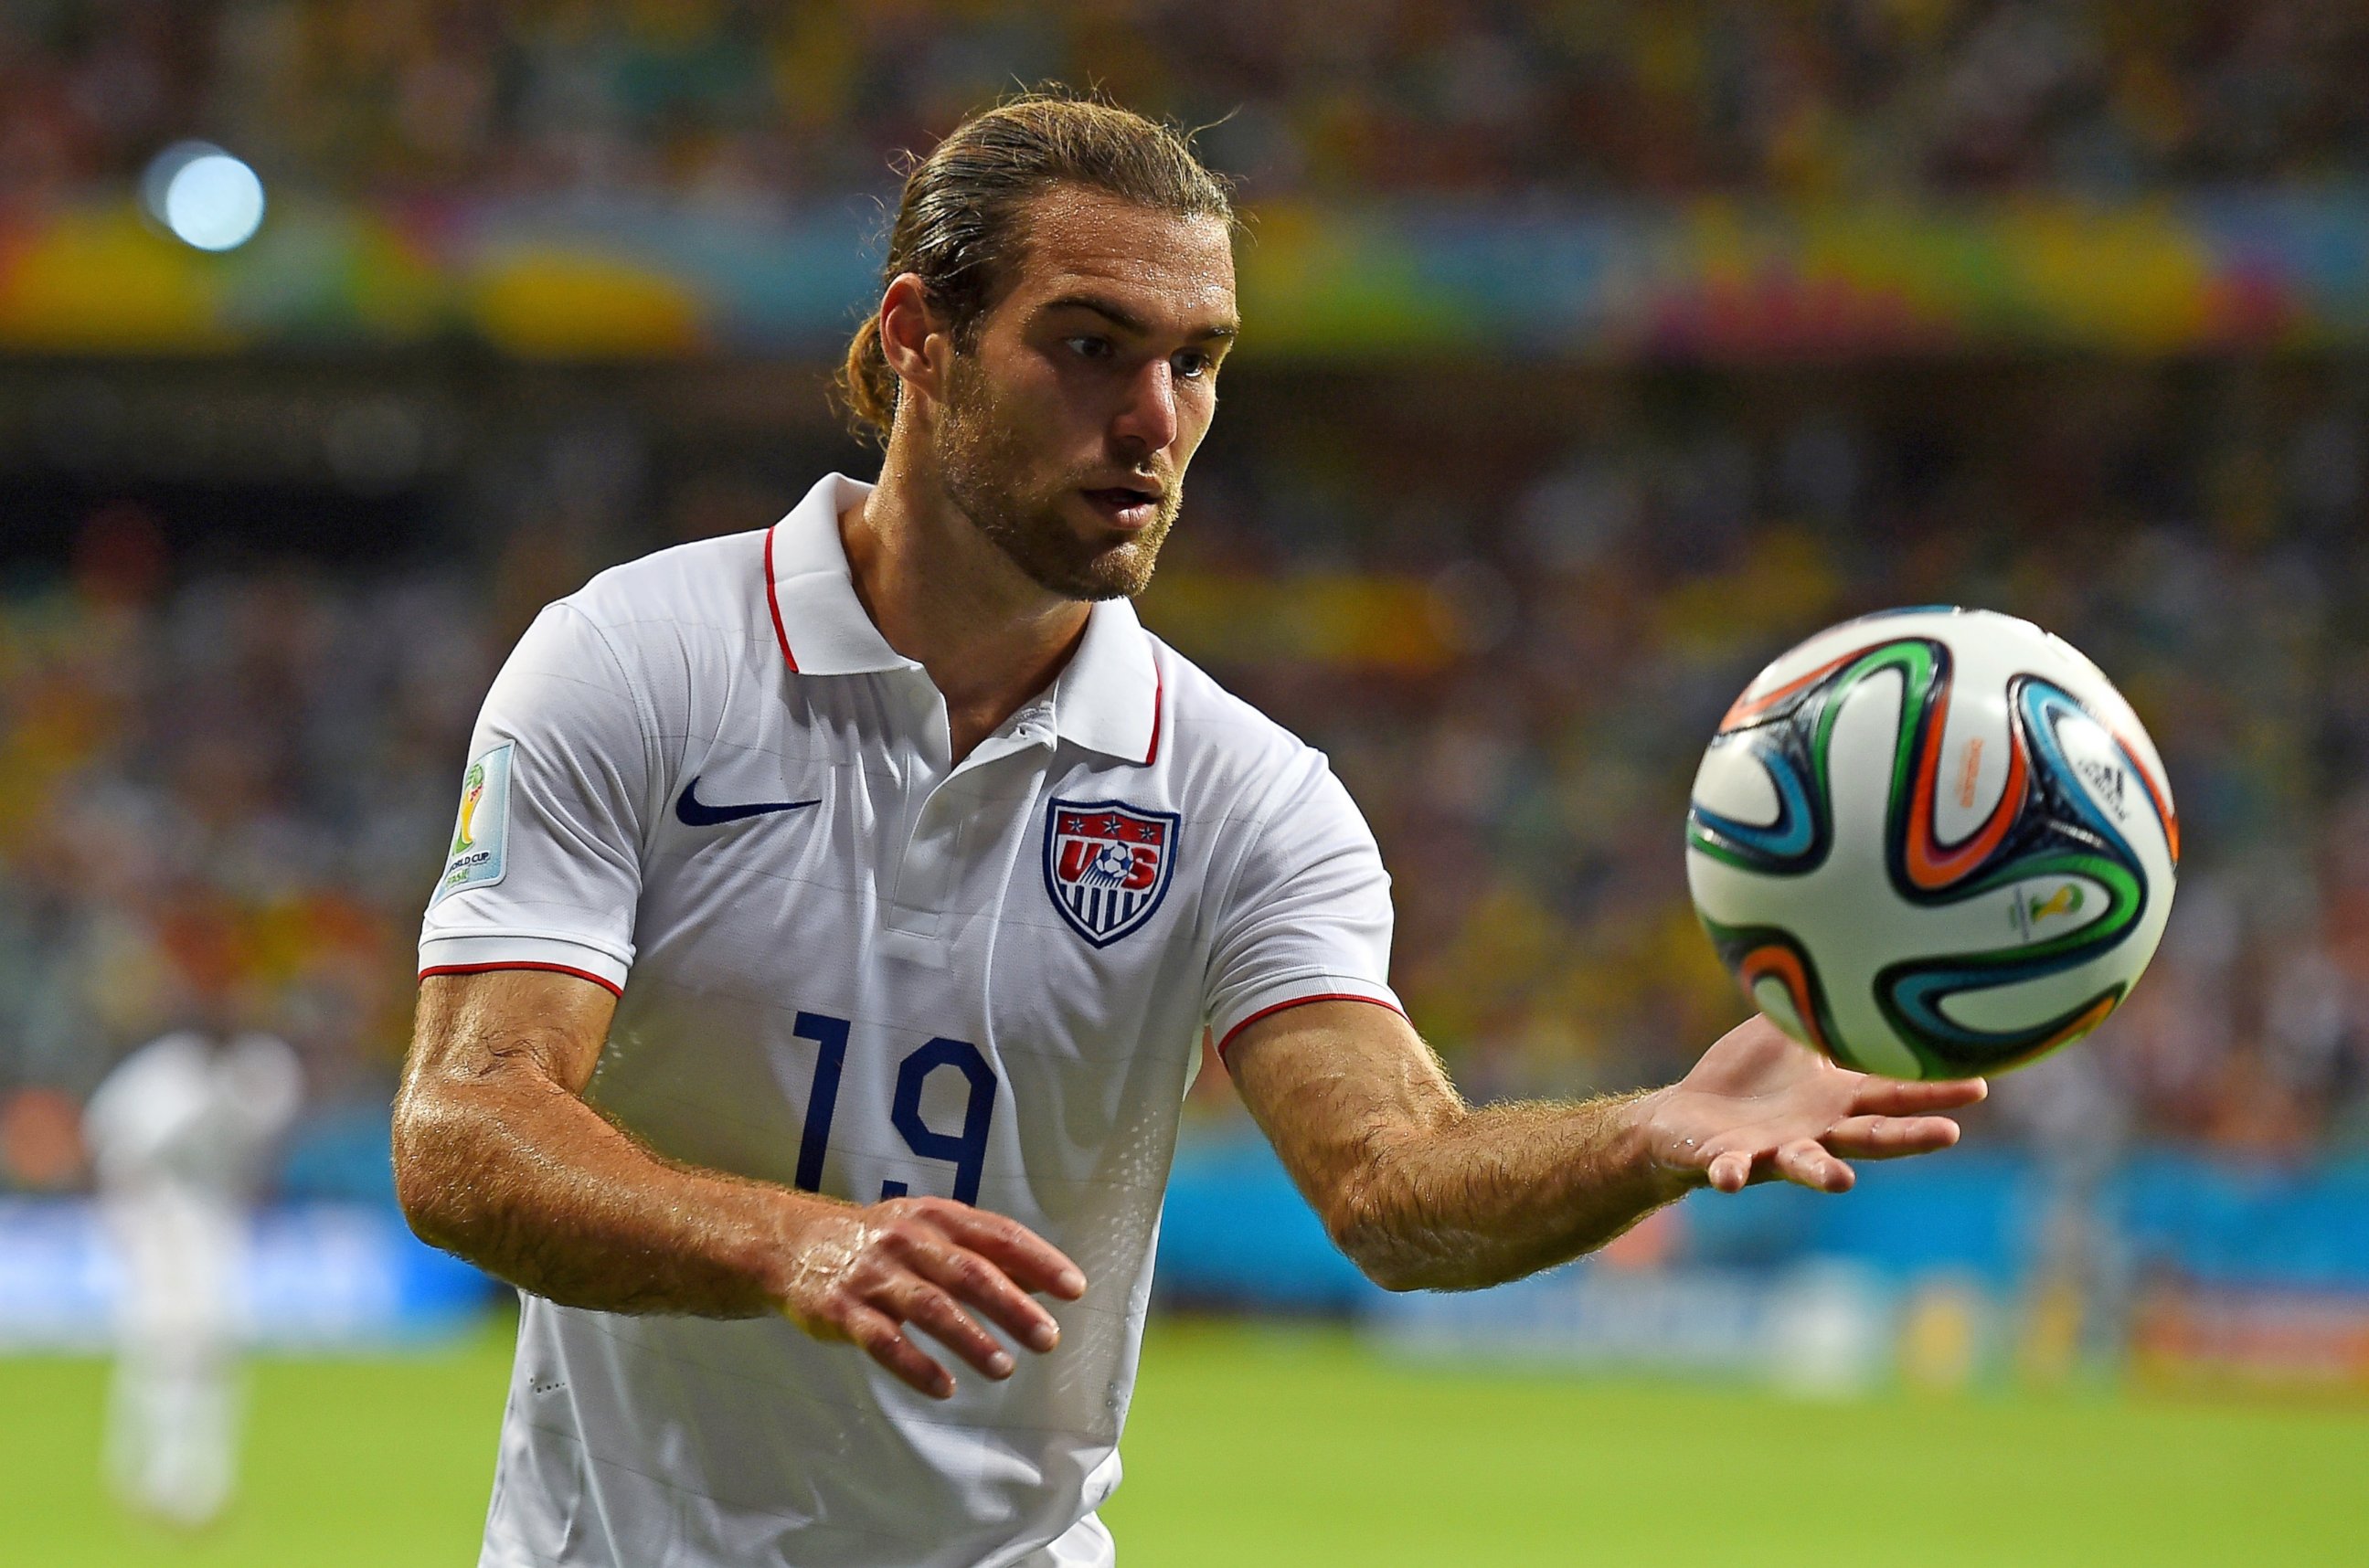 PHOTO: Graham Zusi of the United States controls the ball during World Cup match between Belgium and the United States on July 1, 2014 in Salvador, Brazil.